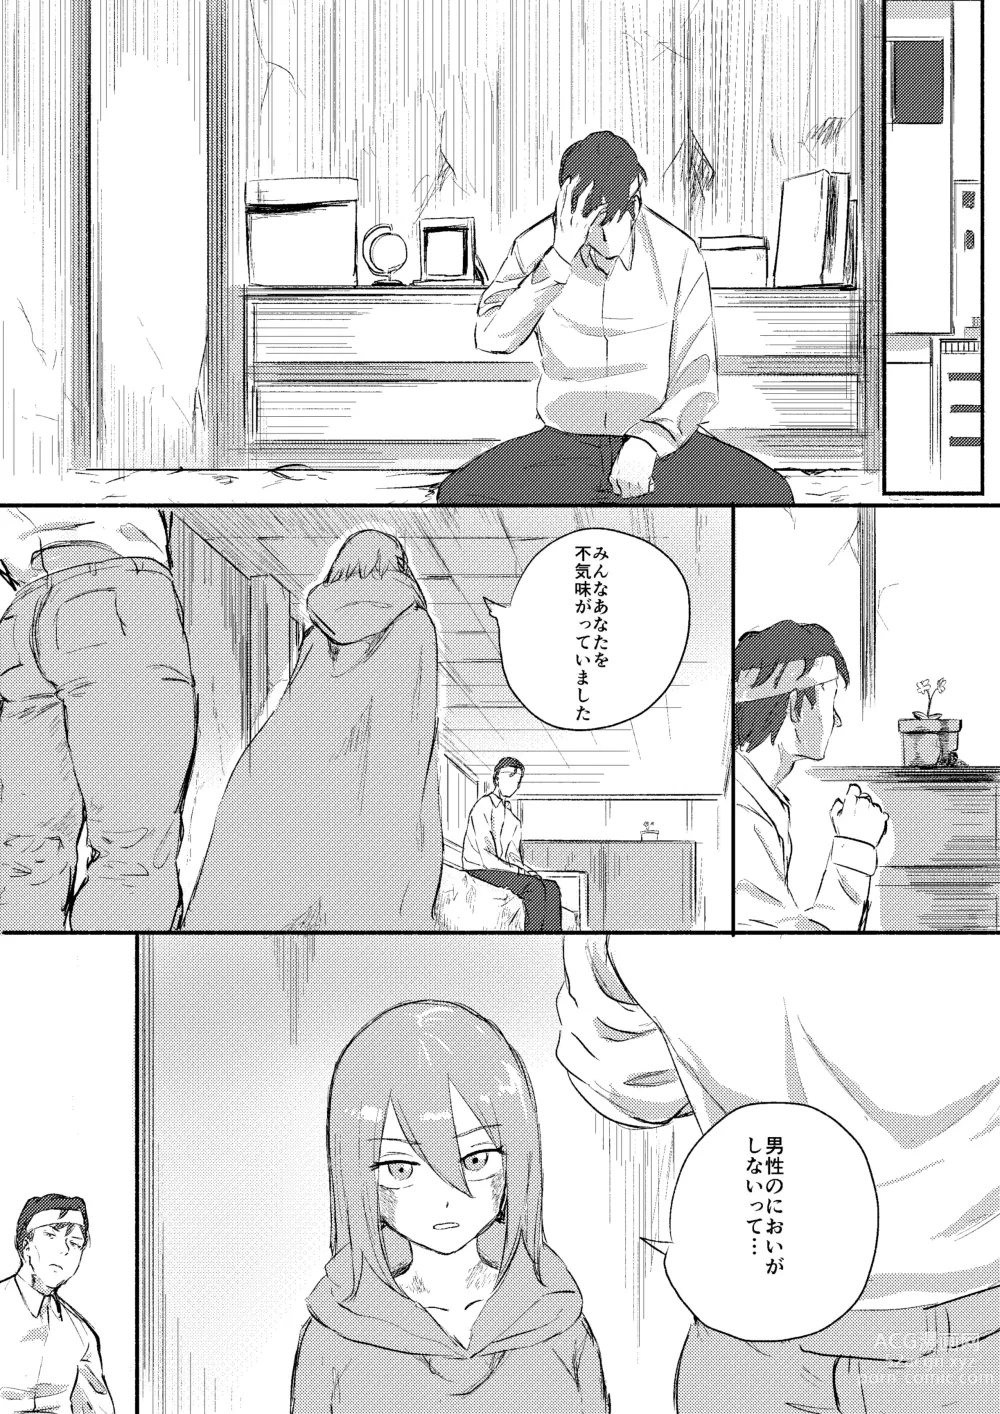 Page 19 of doujinshi Red Tag Episode 10